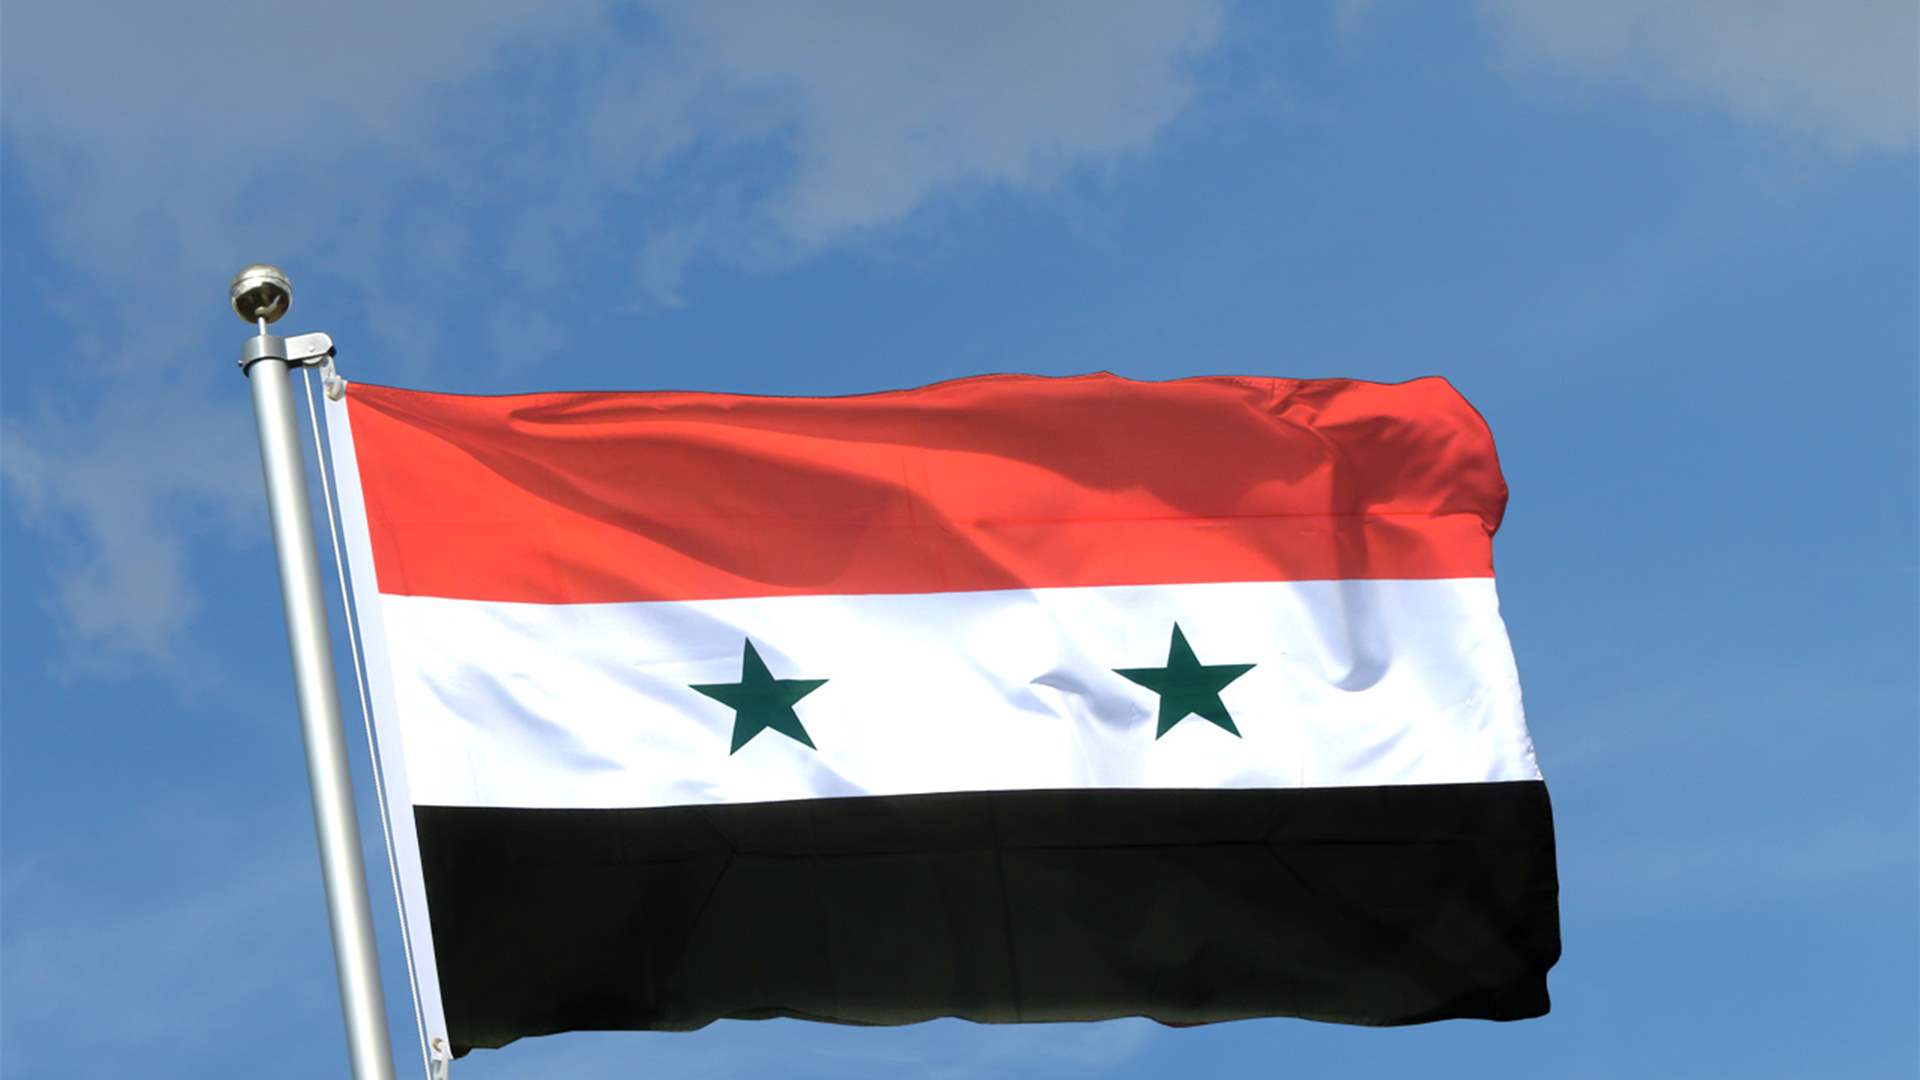 Syria condemns aggression on Beirut&#39;s southern suburbs, expresses solidarity with Lebanon